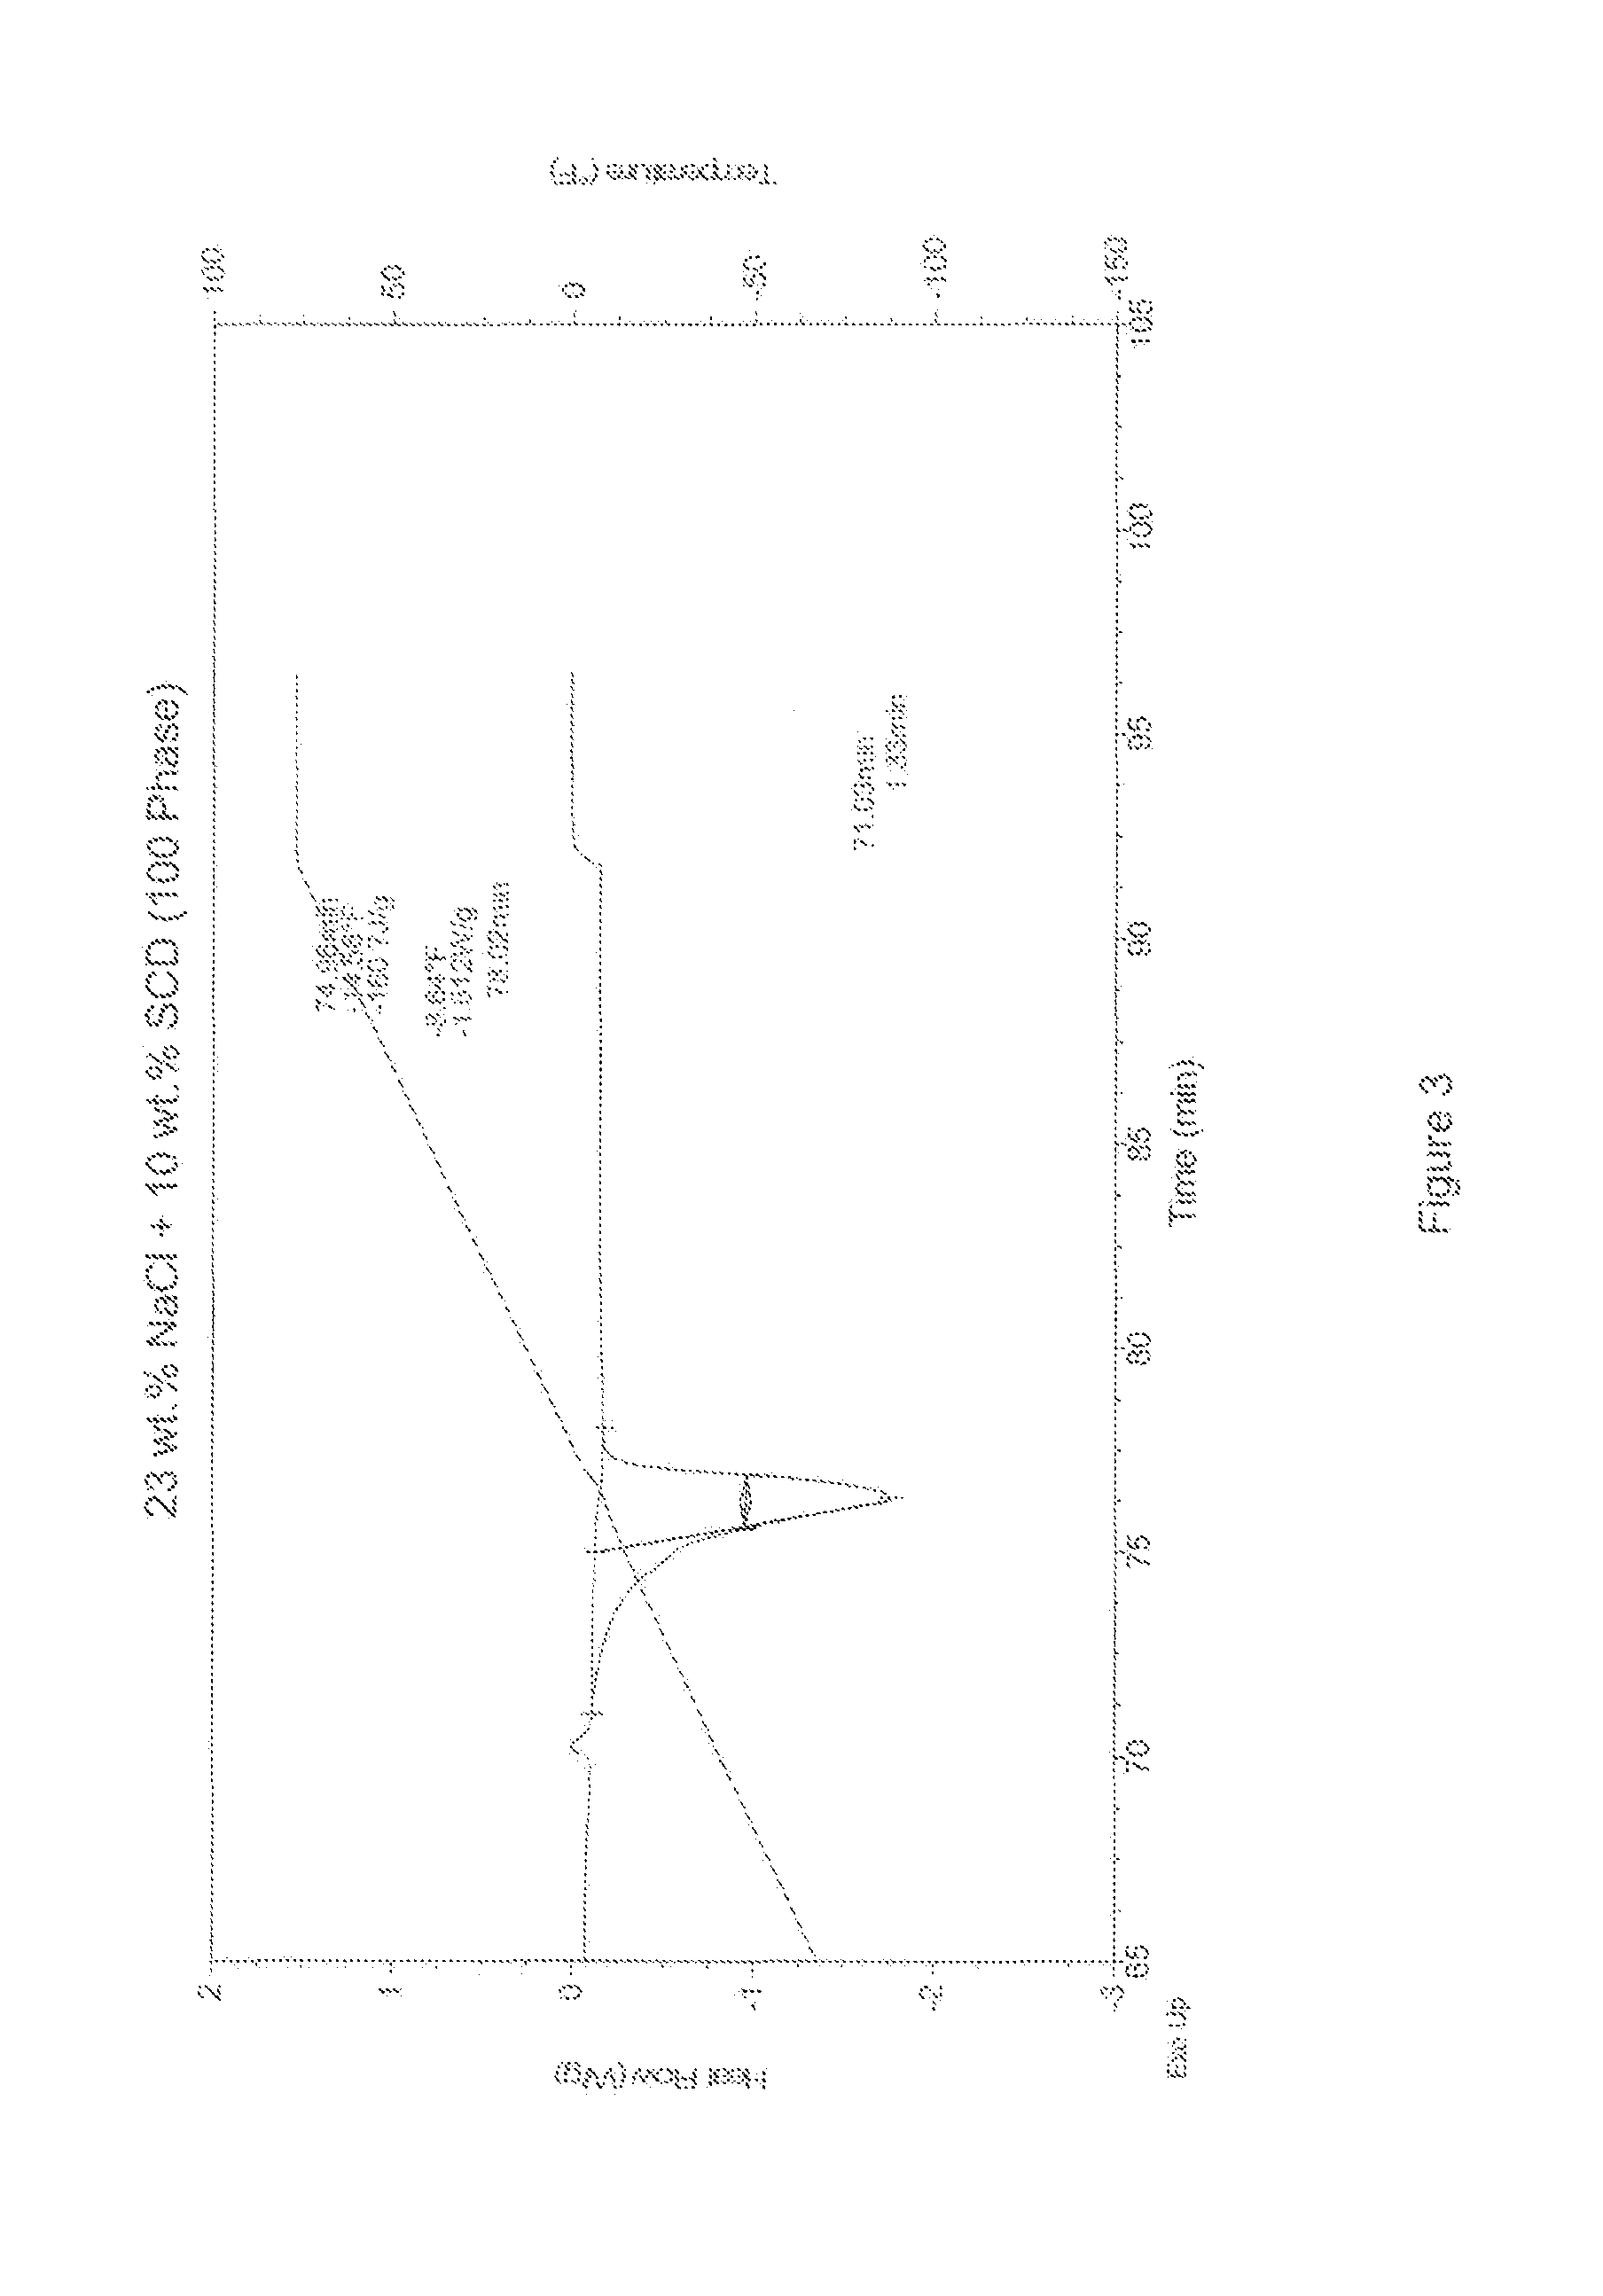 Citrate containing deicing compositions with improved eutectic temperatures